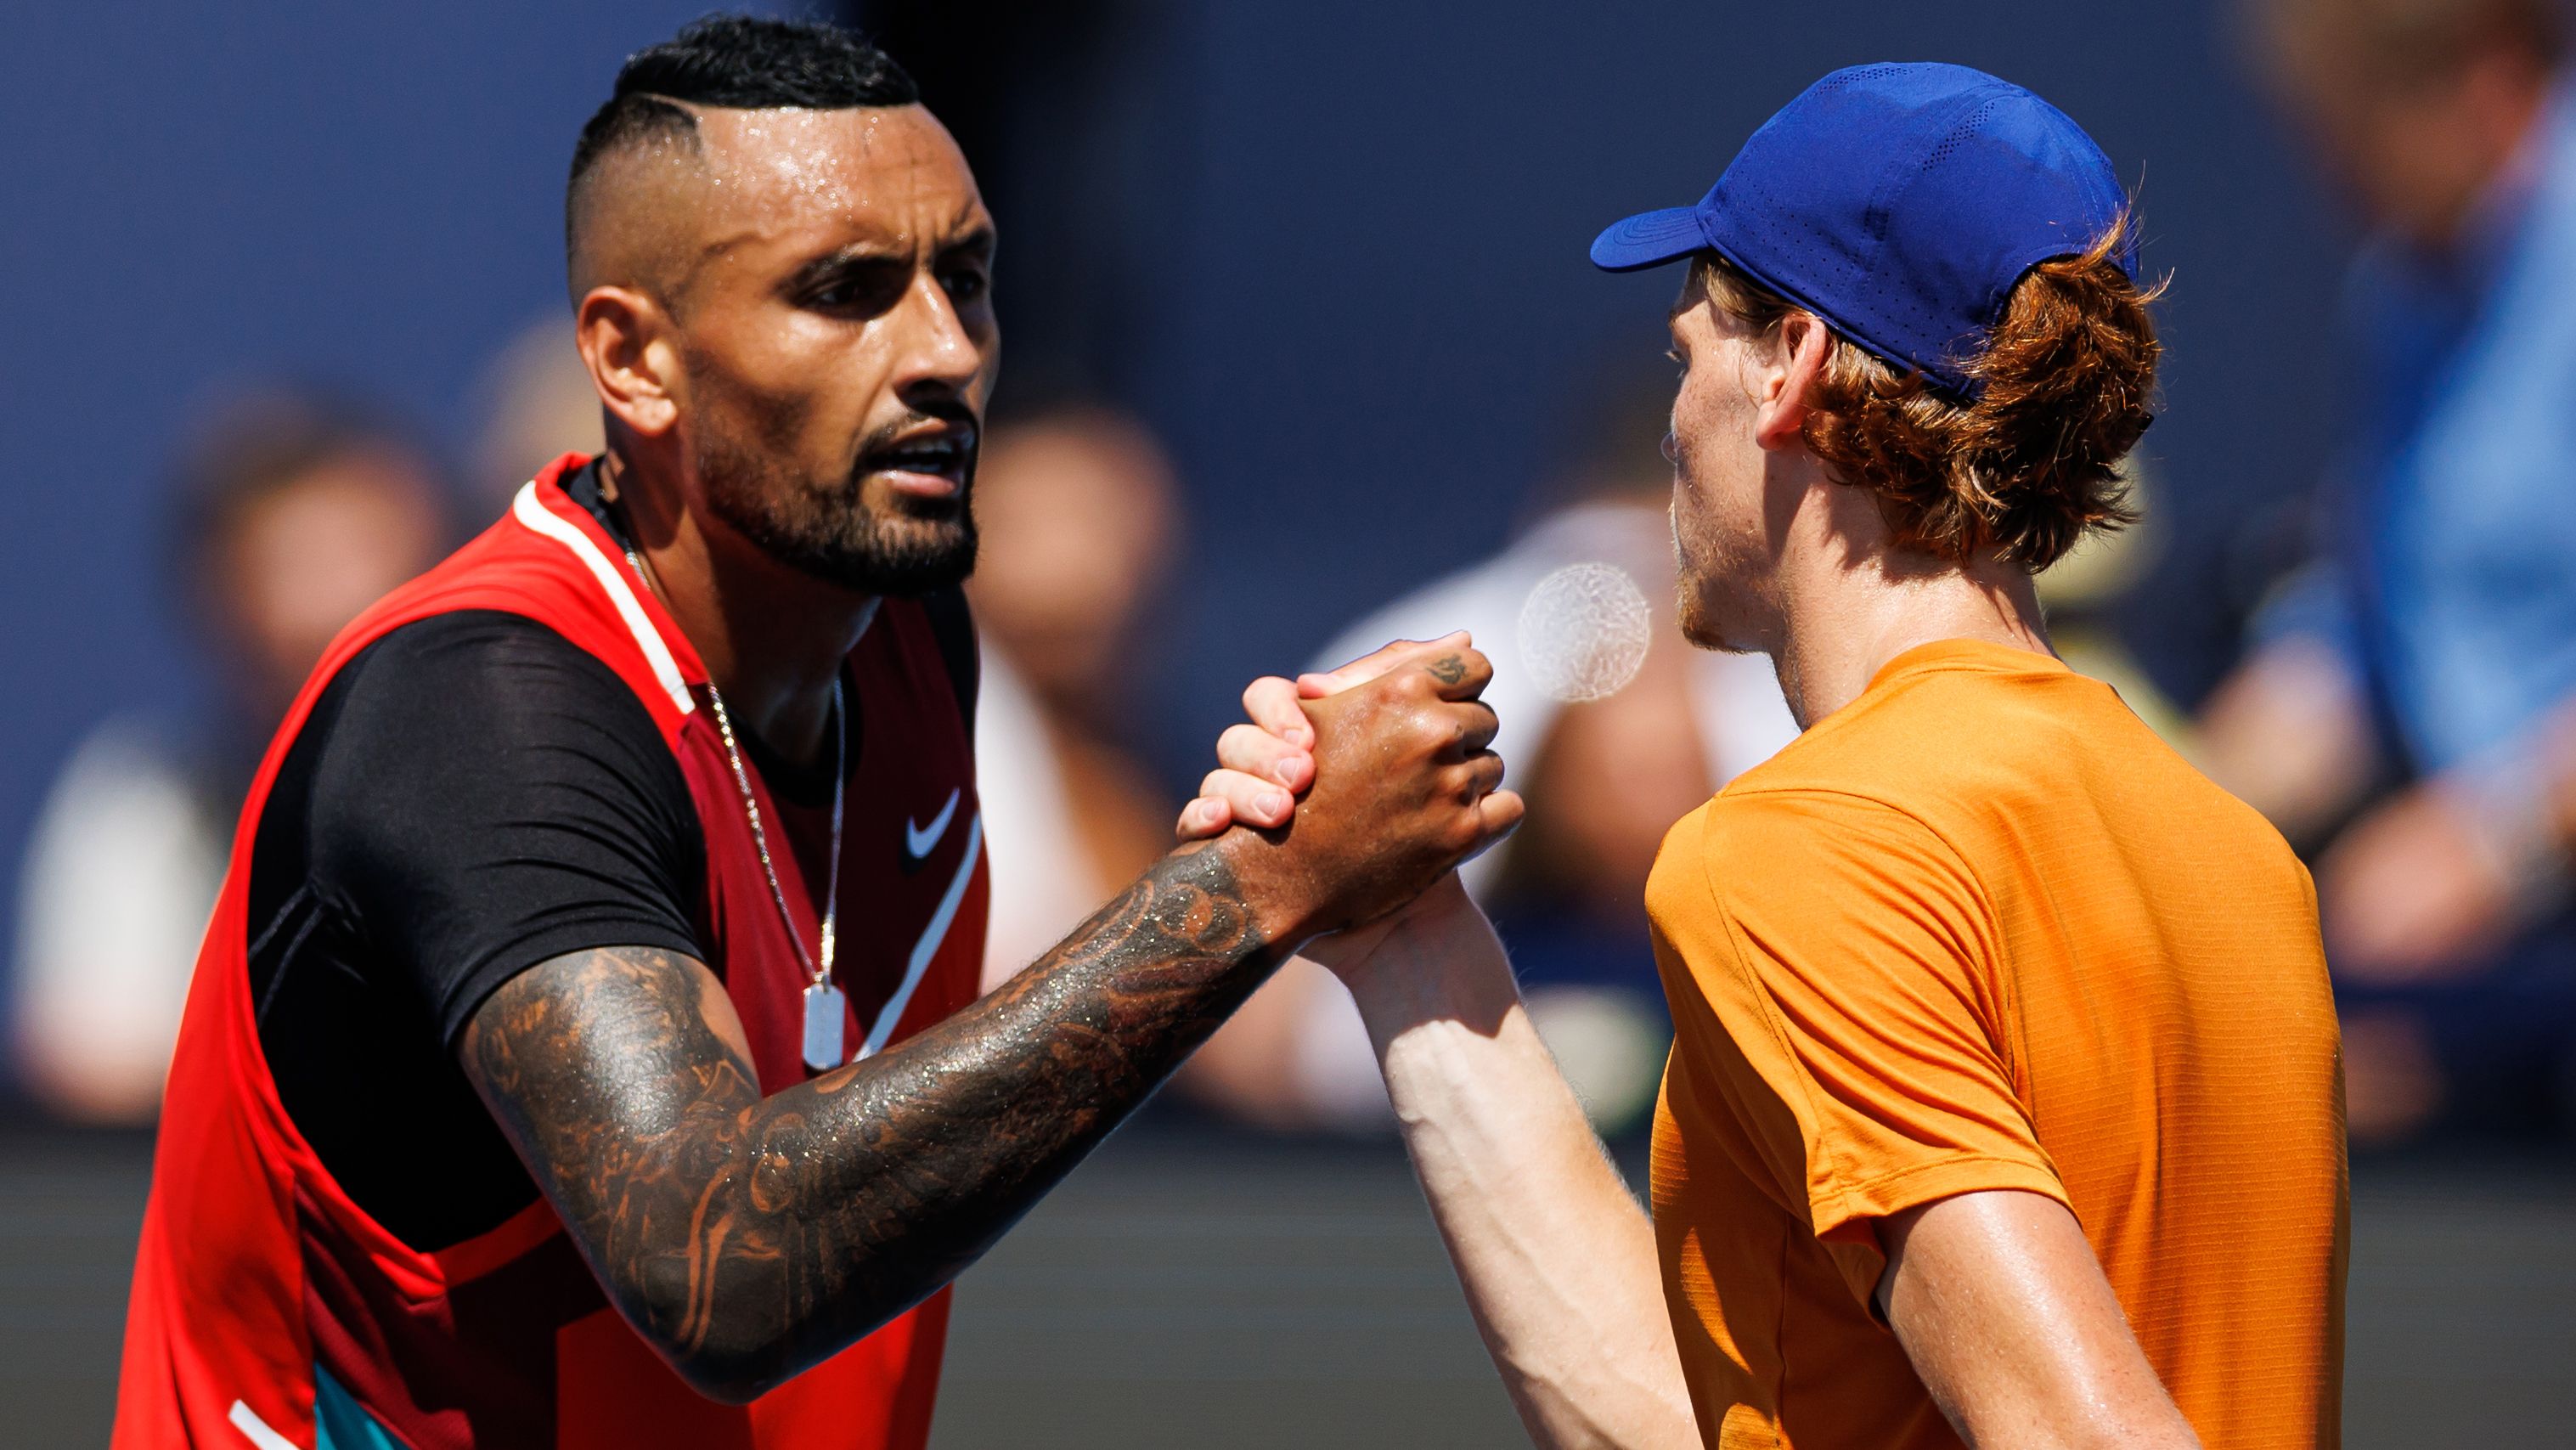 Jannik Sinner and Nick Kyrgios of Australia after their match at the Miami Open in 2022.